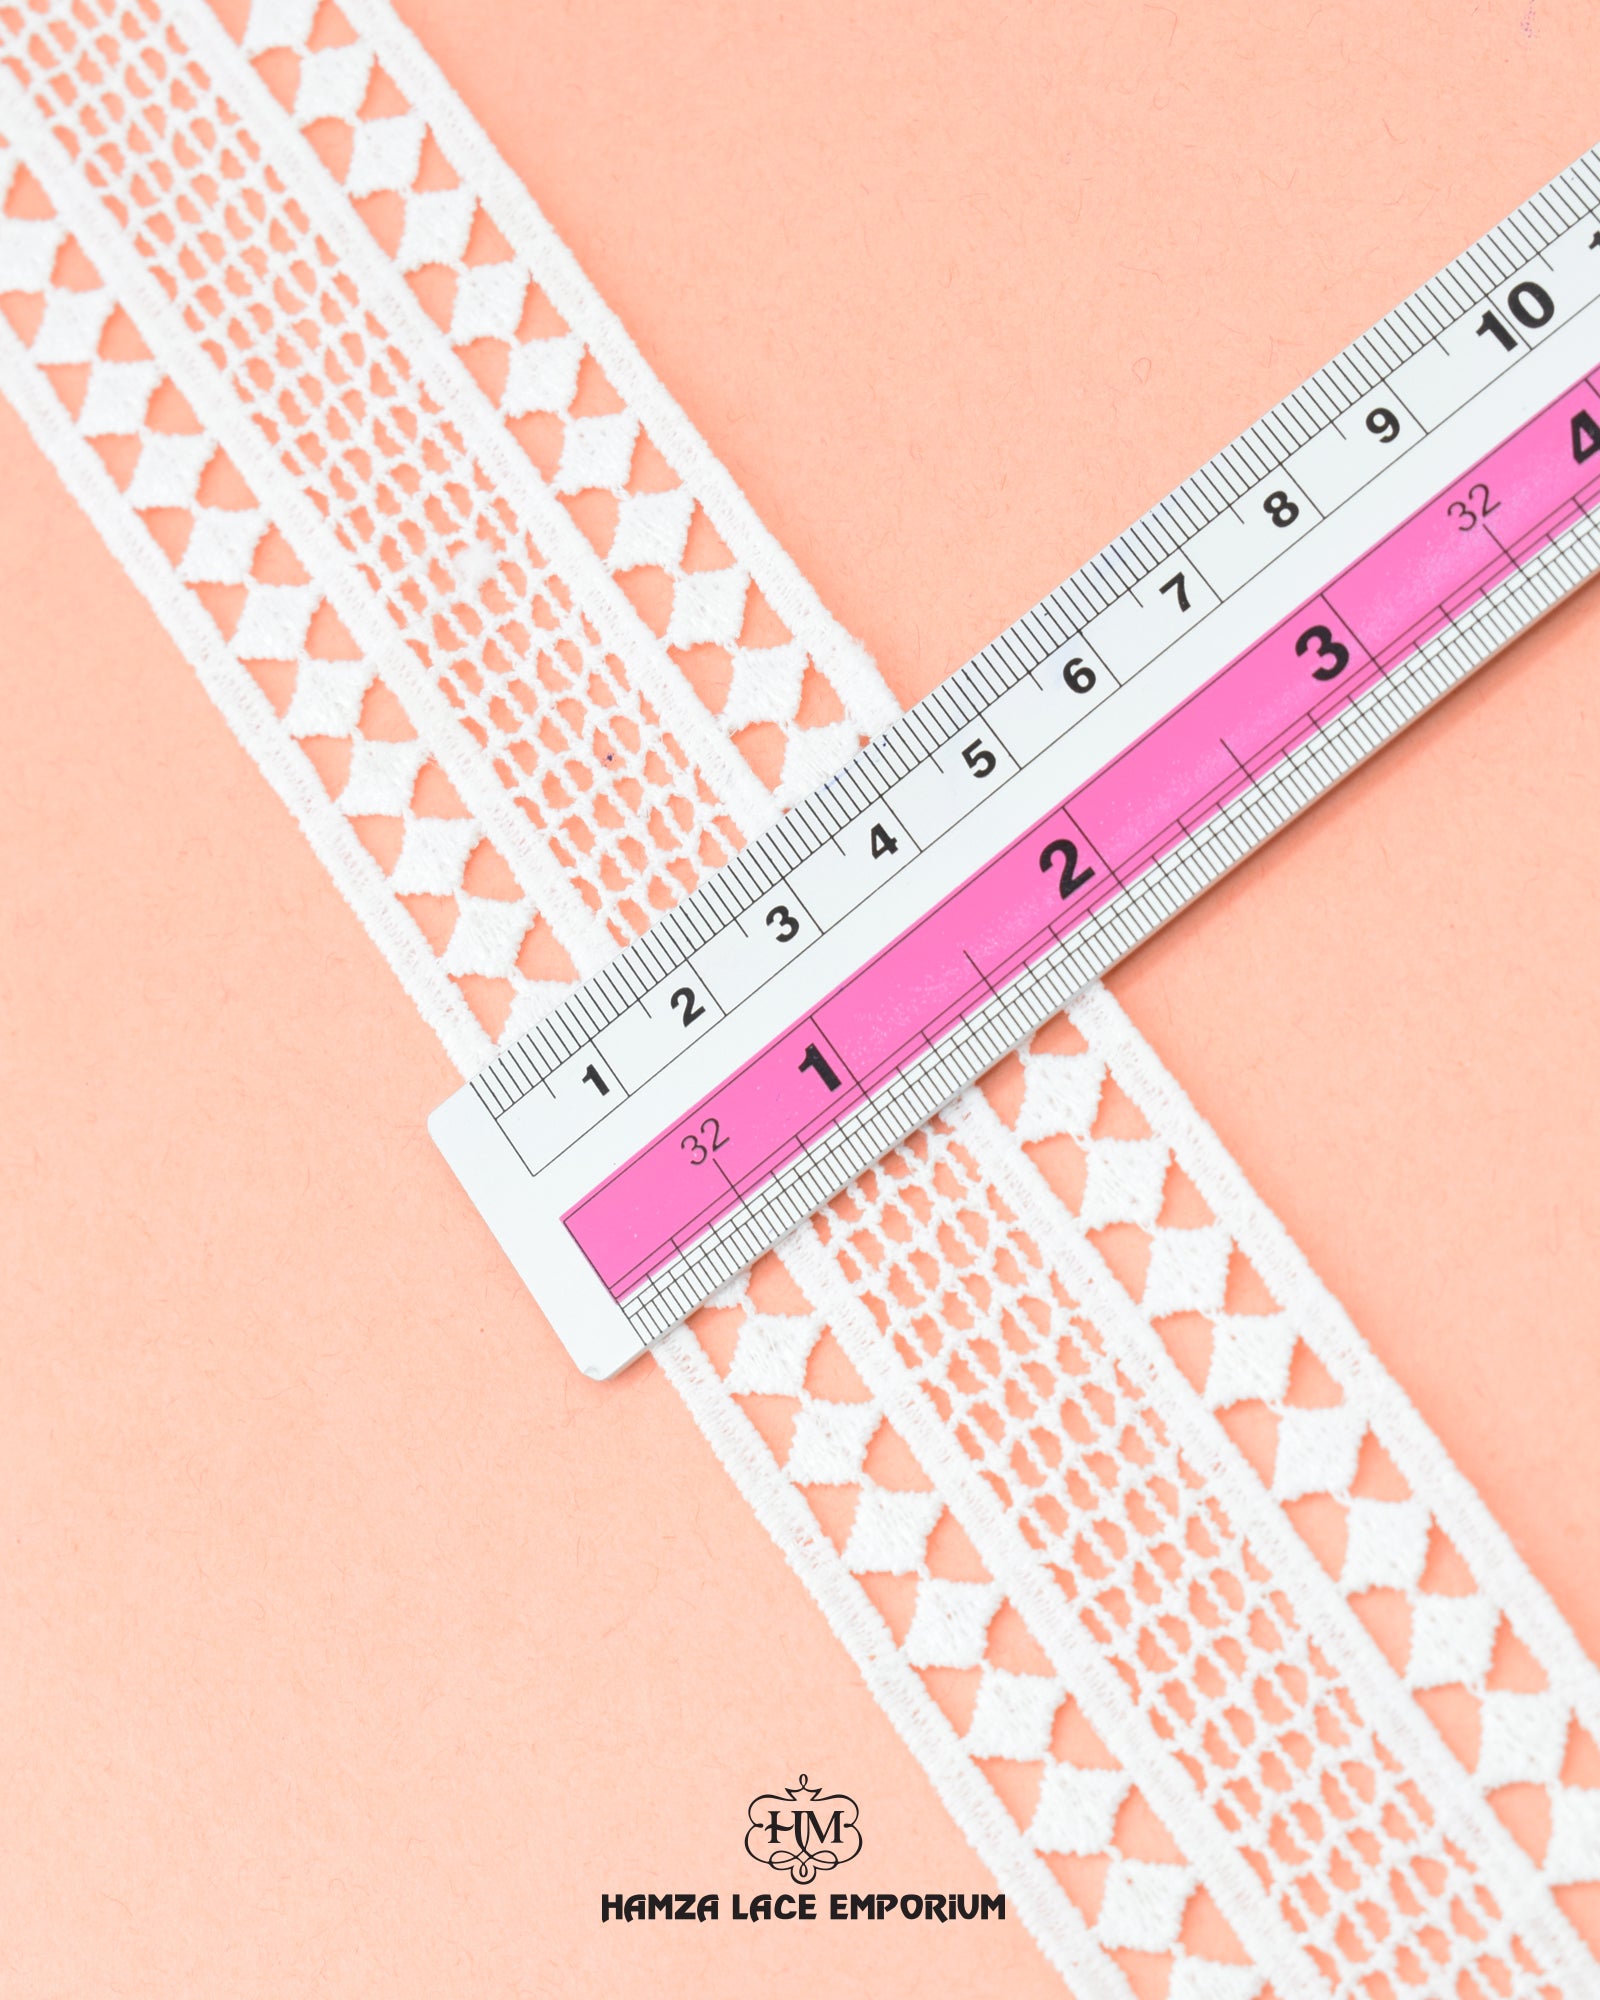 Size of the 'Center Filling Lace 23202' is shown as '1.75' inches with the help of a ruler